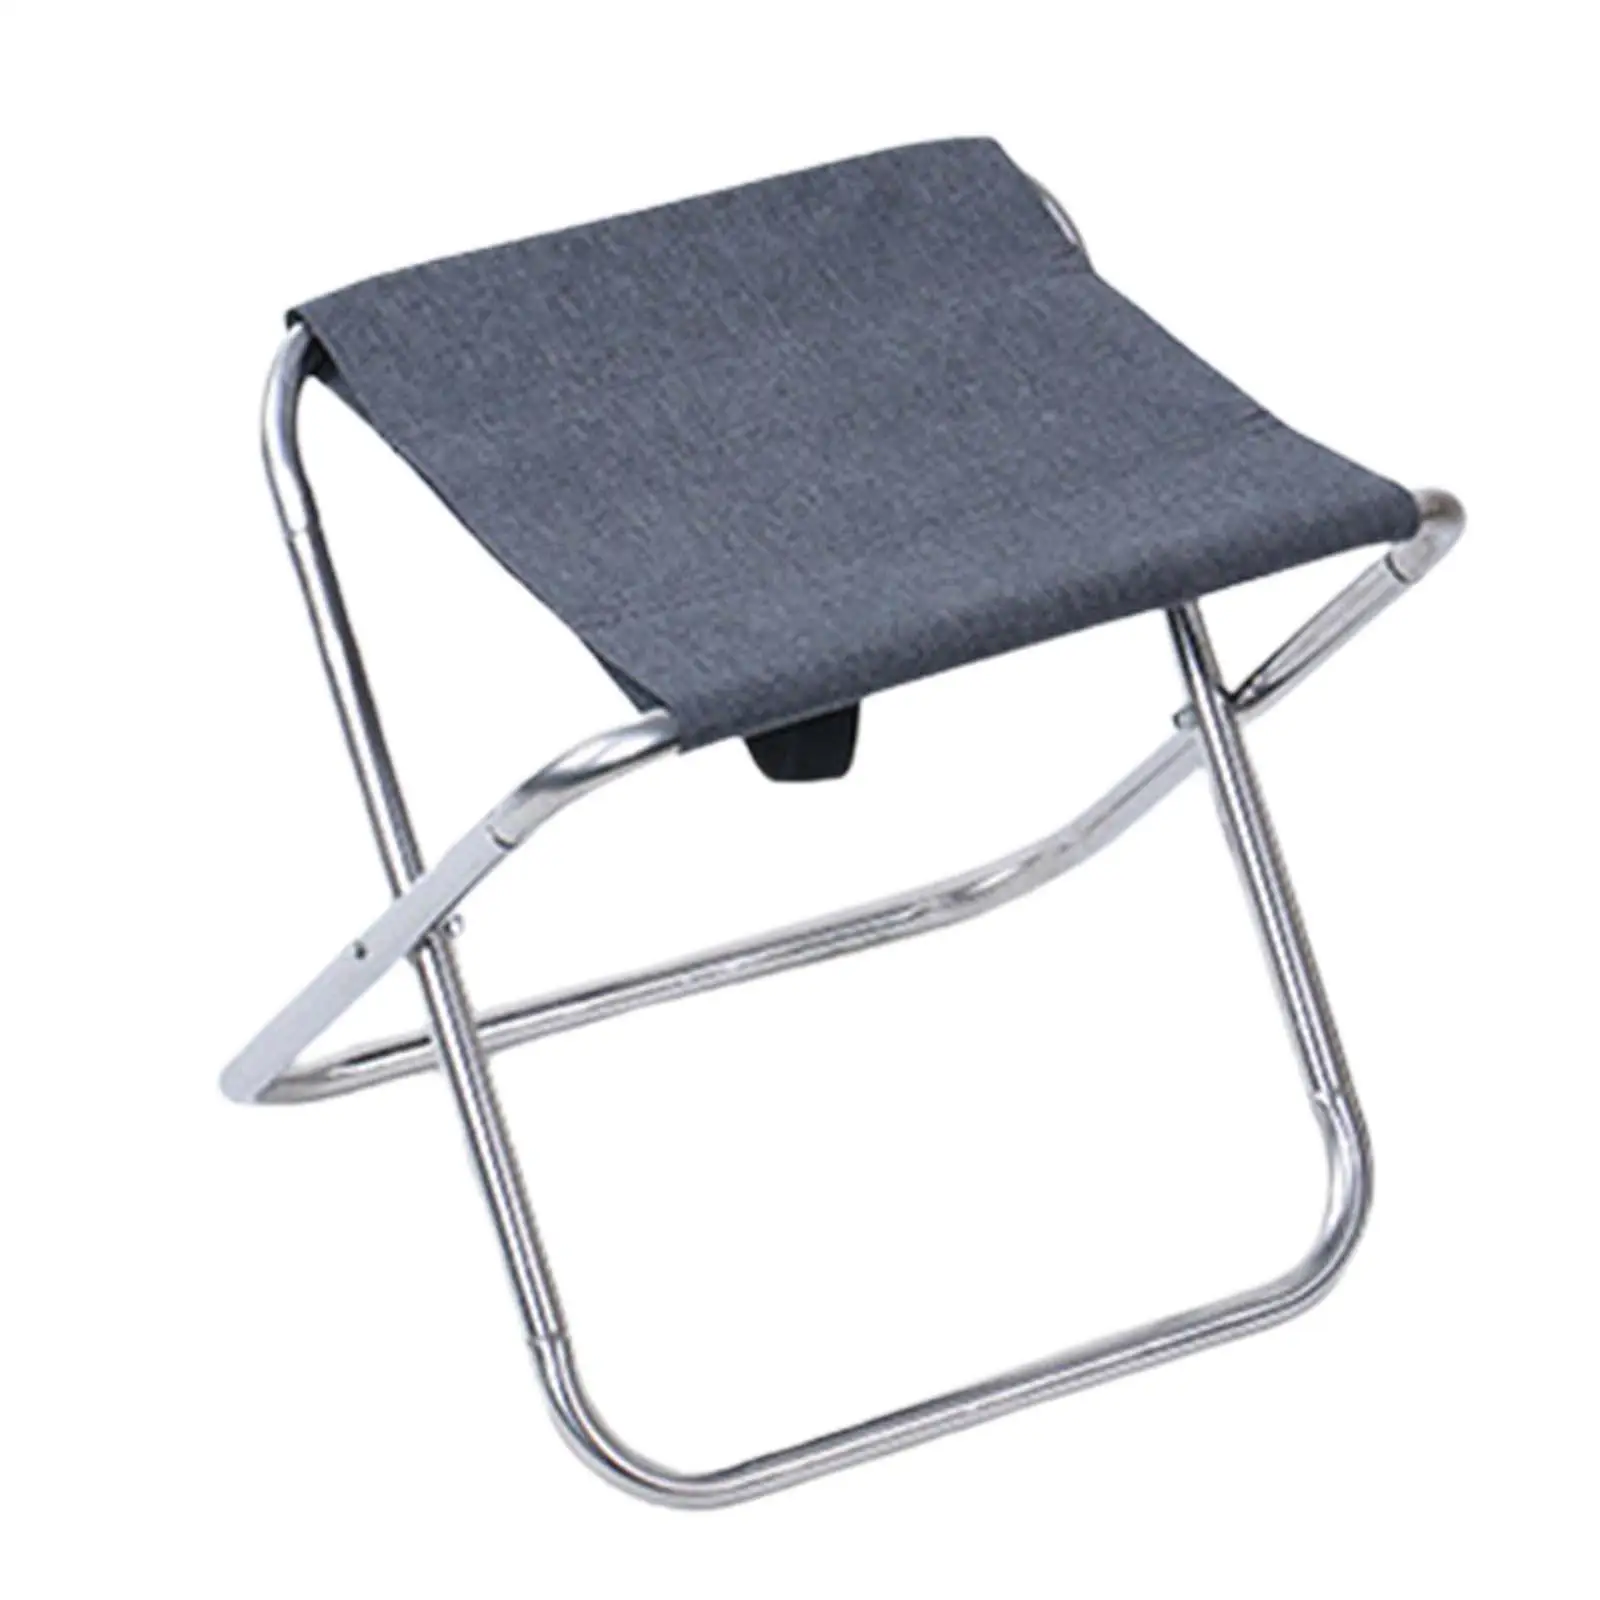 Folding Stool Camping Foldable Camp Stool Wear Resistant Lightweight Fishing Chair for Sports Traveling Fishing Garden